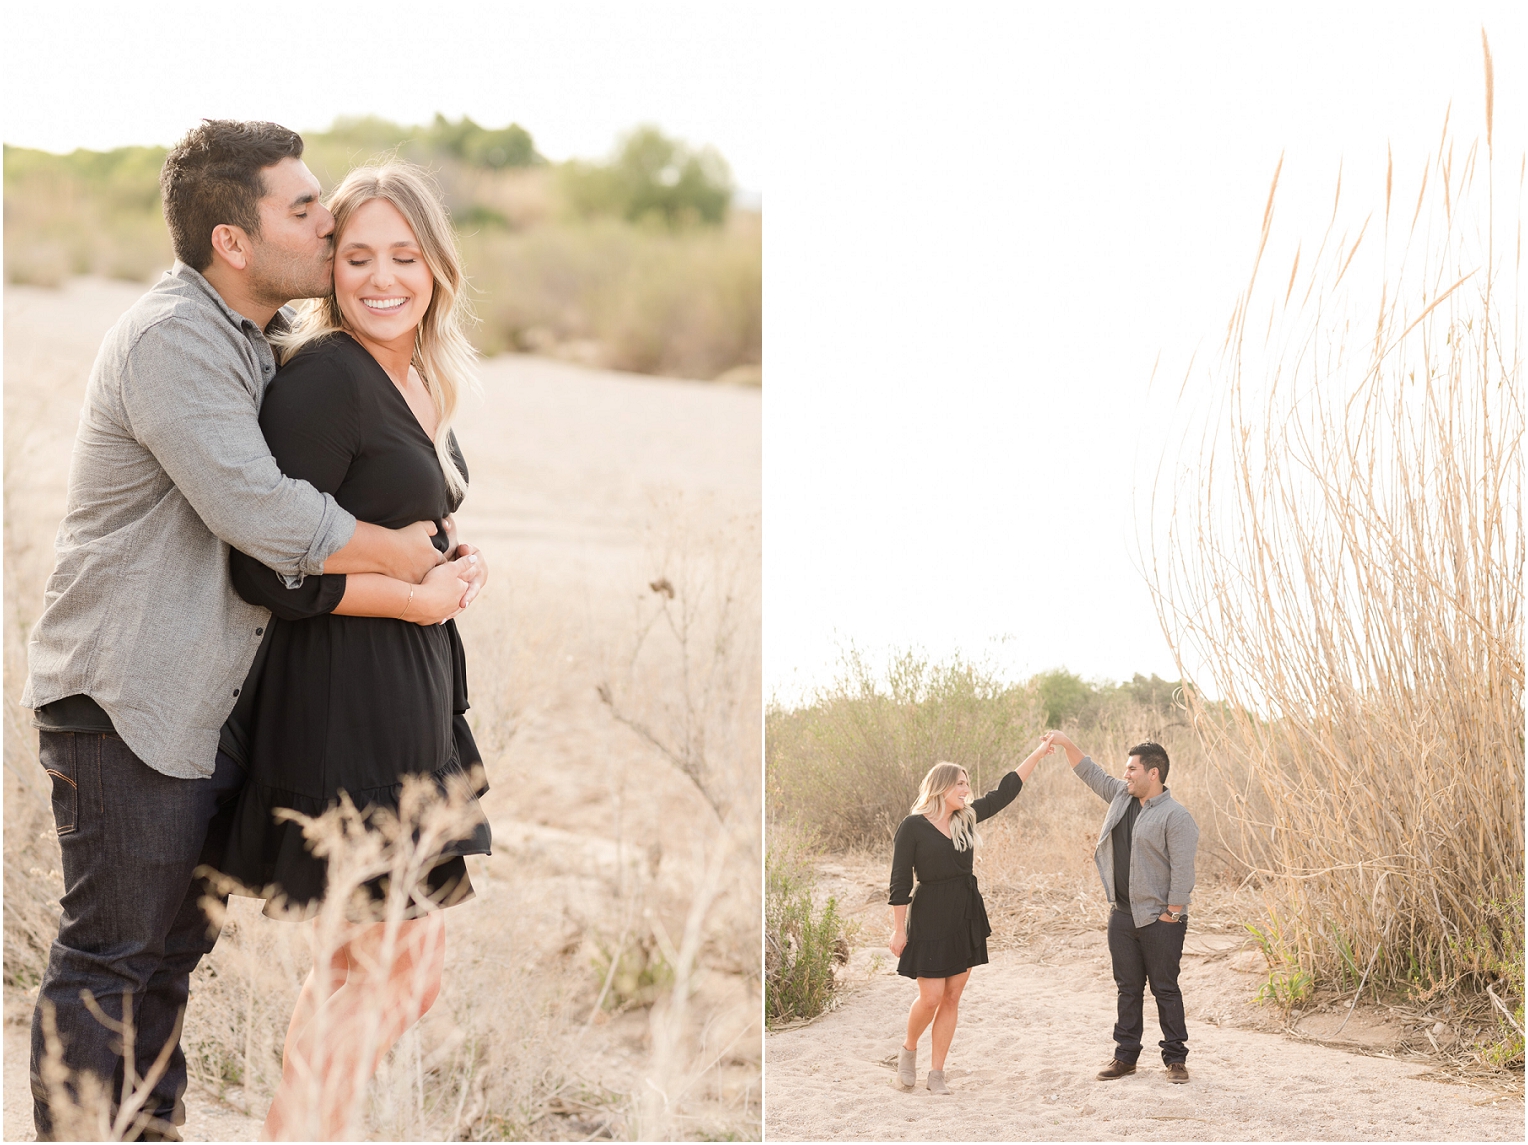 Tucson Desert Engagement Photos Tucson Photographer Eddie and Chanel couple in field